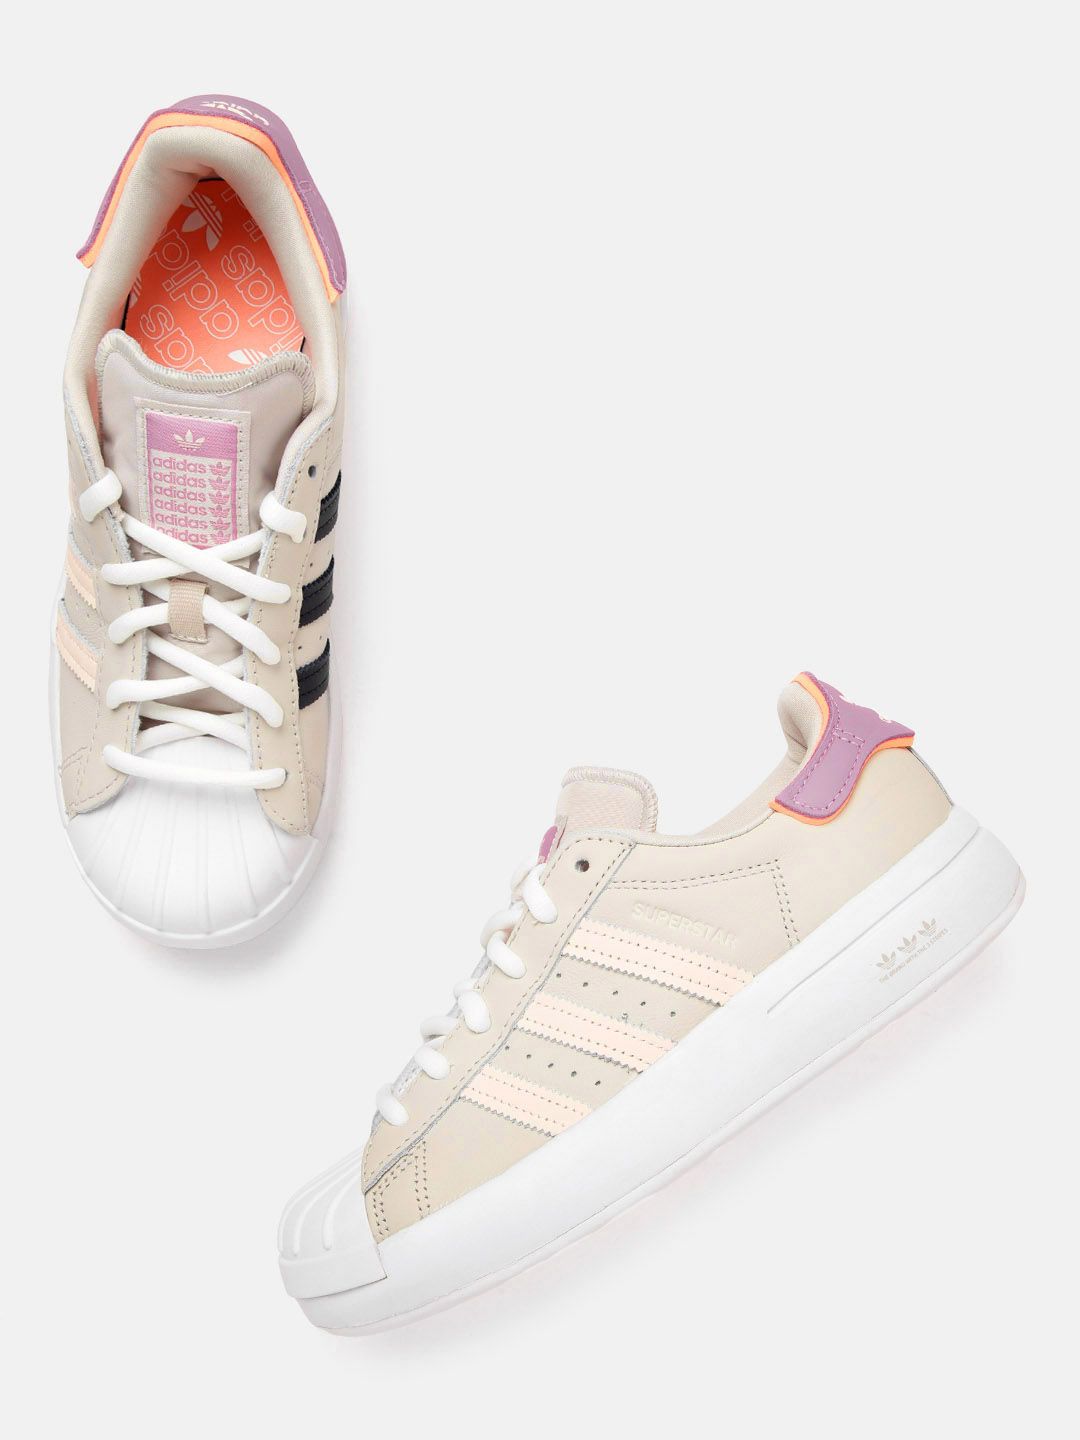 ADIDAS Originals Women Beige & Peach-Coloured Striped Superstar Soft Leather Sneakers Price in India